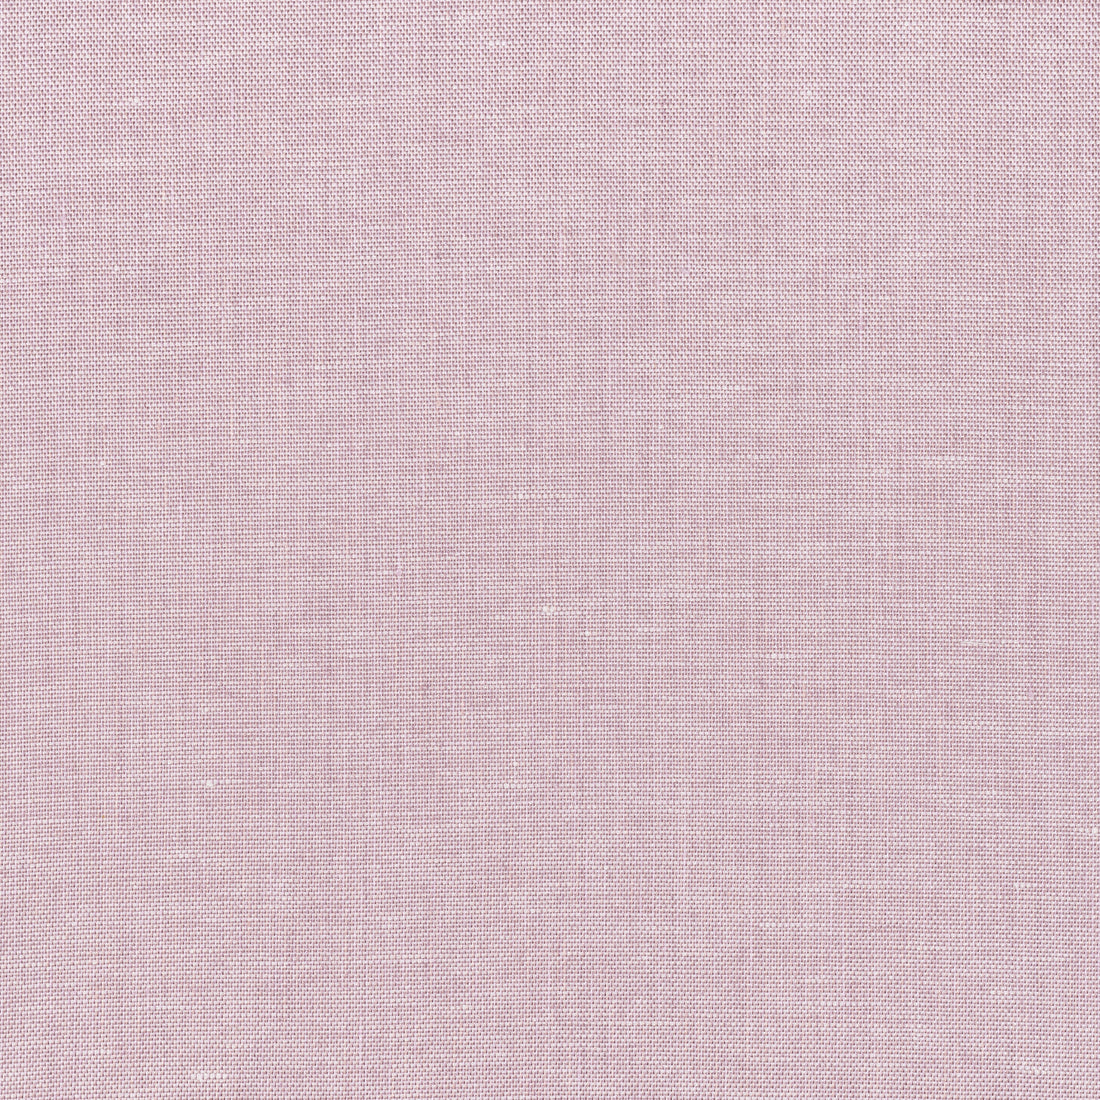 Skye Linen fabric in wisteria color - pattern number FWW7610 - by Thibaut in the Palisades collection